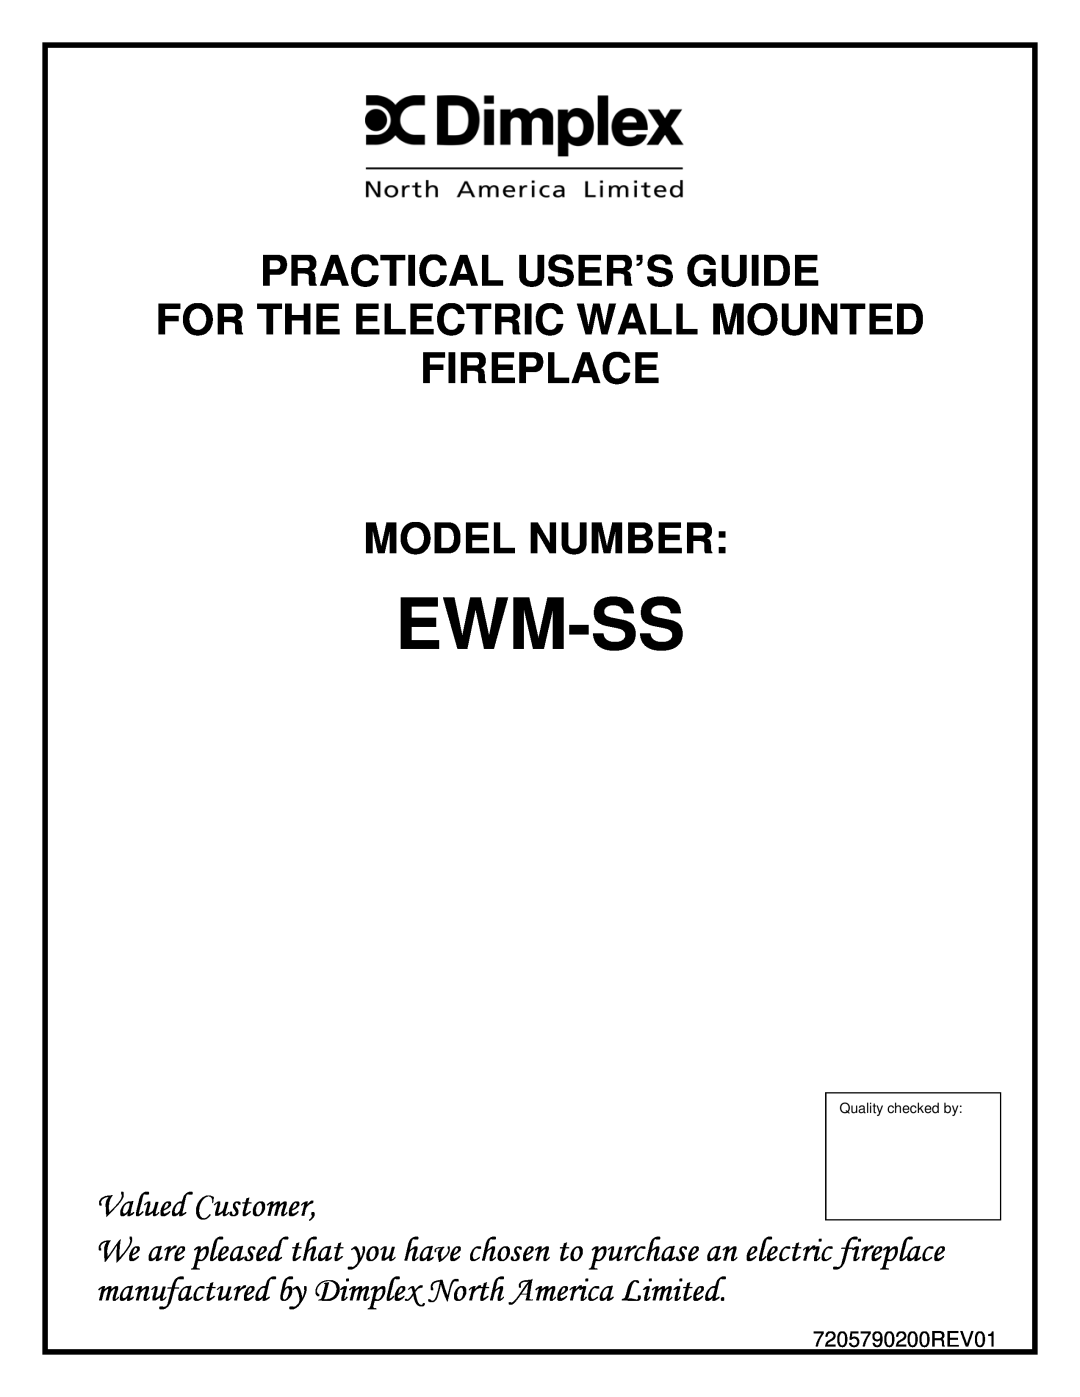 Dimplex EWM-SS manual Ewm-Ss, Practical User’S Guide, For The Electric Wall Mounted Fireplace, Model Number 